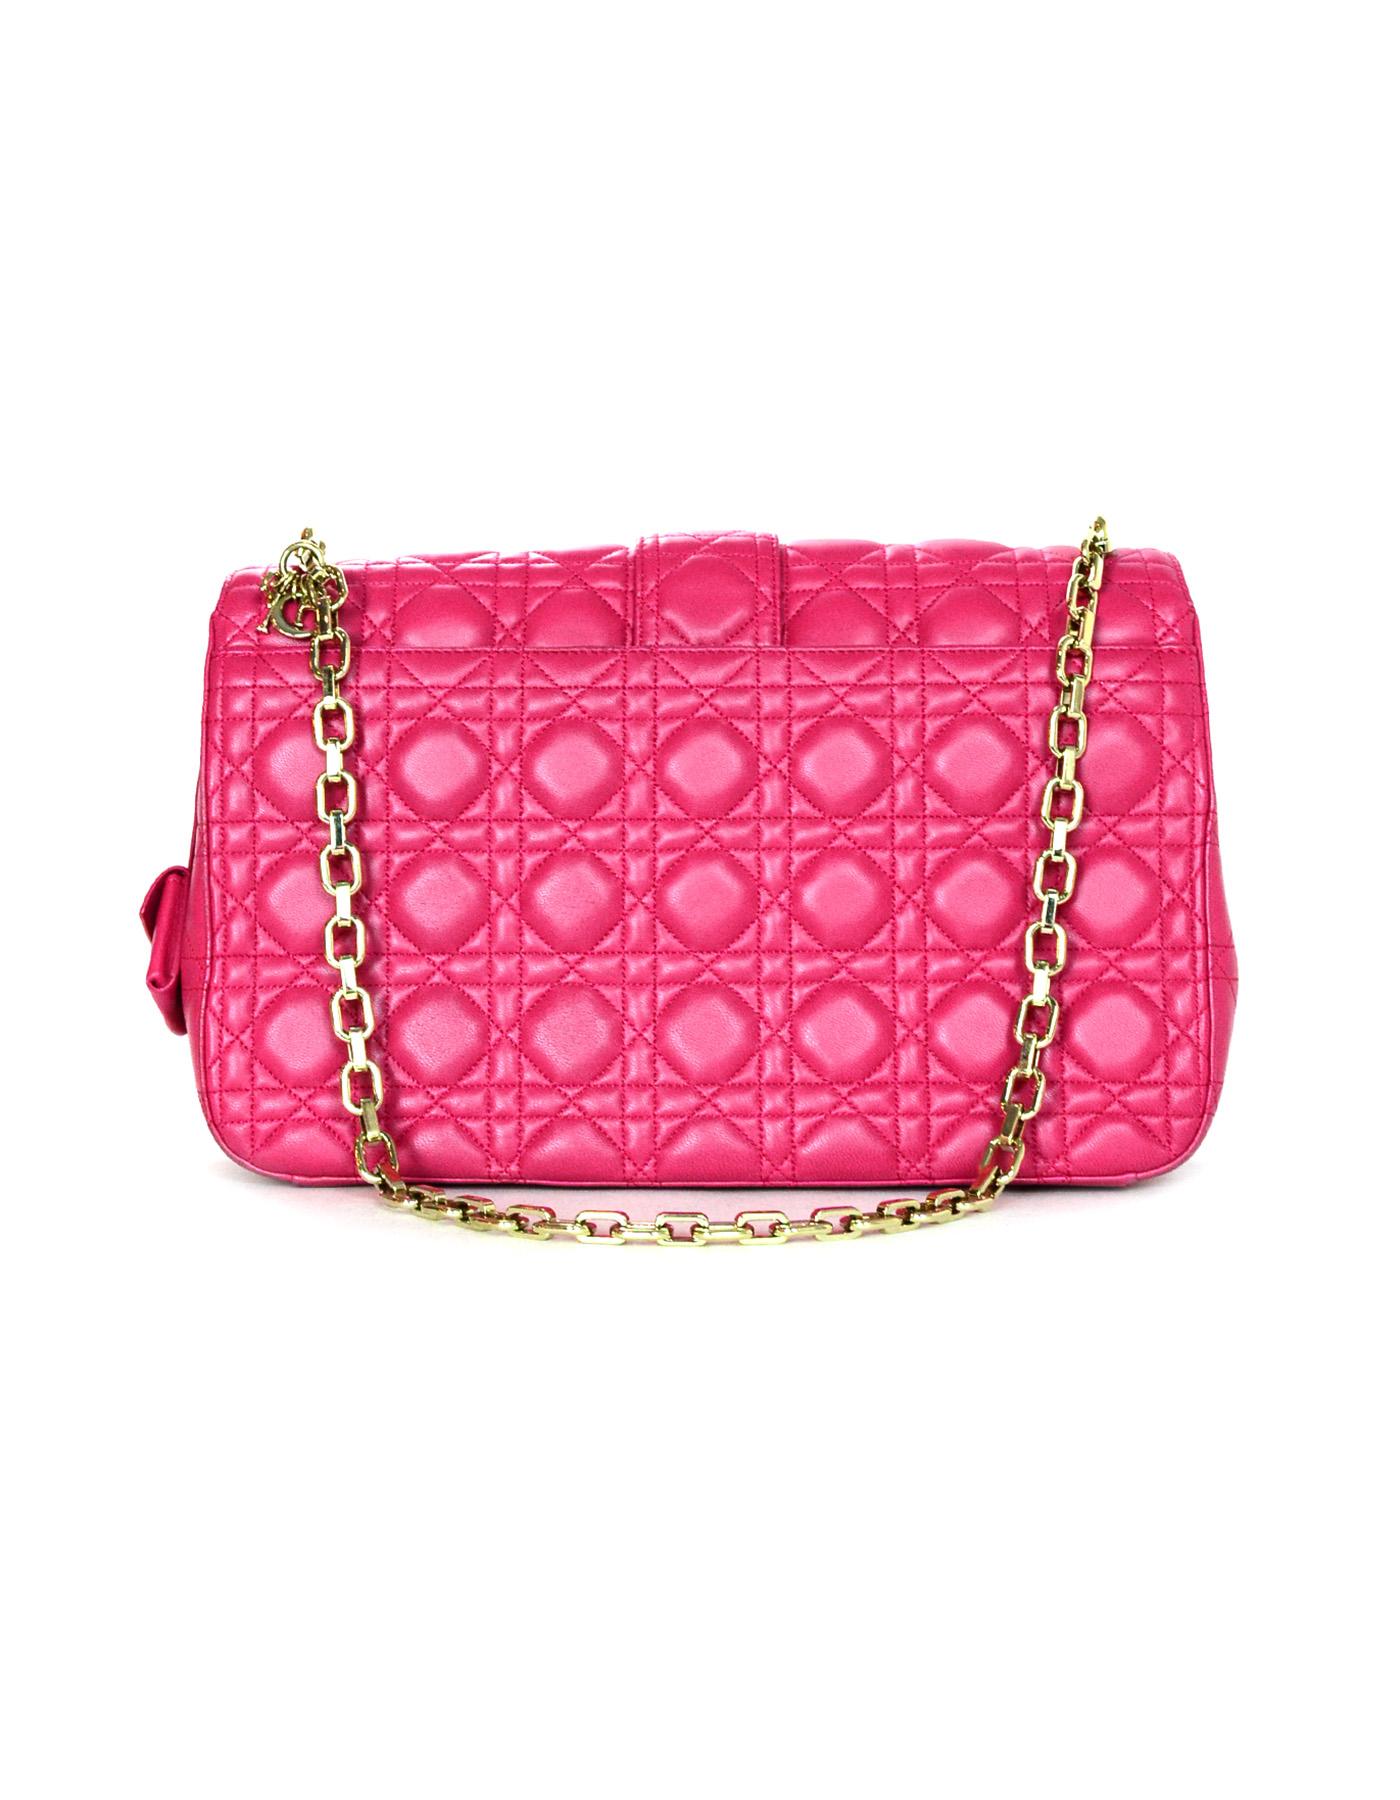 Christian Dior Pink Lambskin Leather Cannage Quilted Large Miss Dior ...